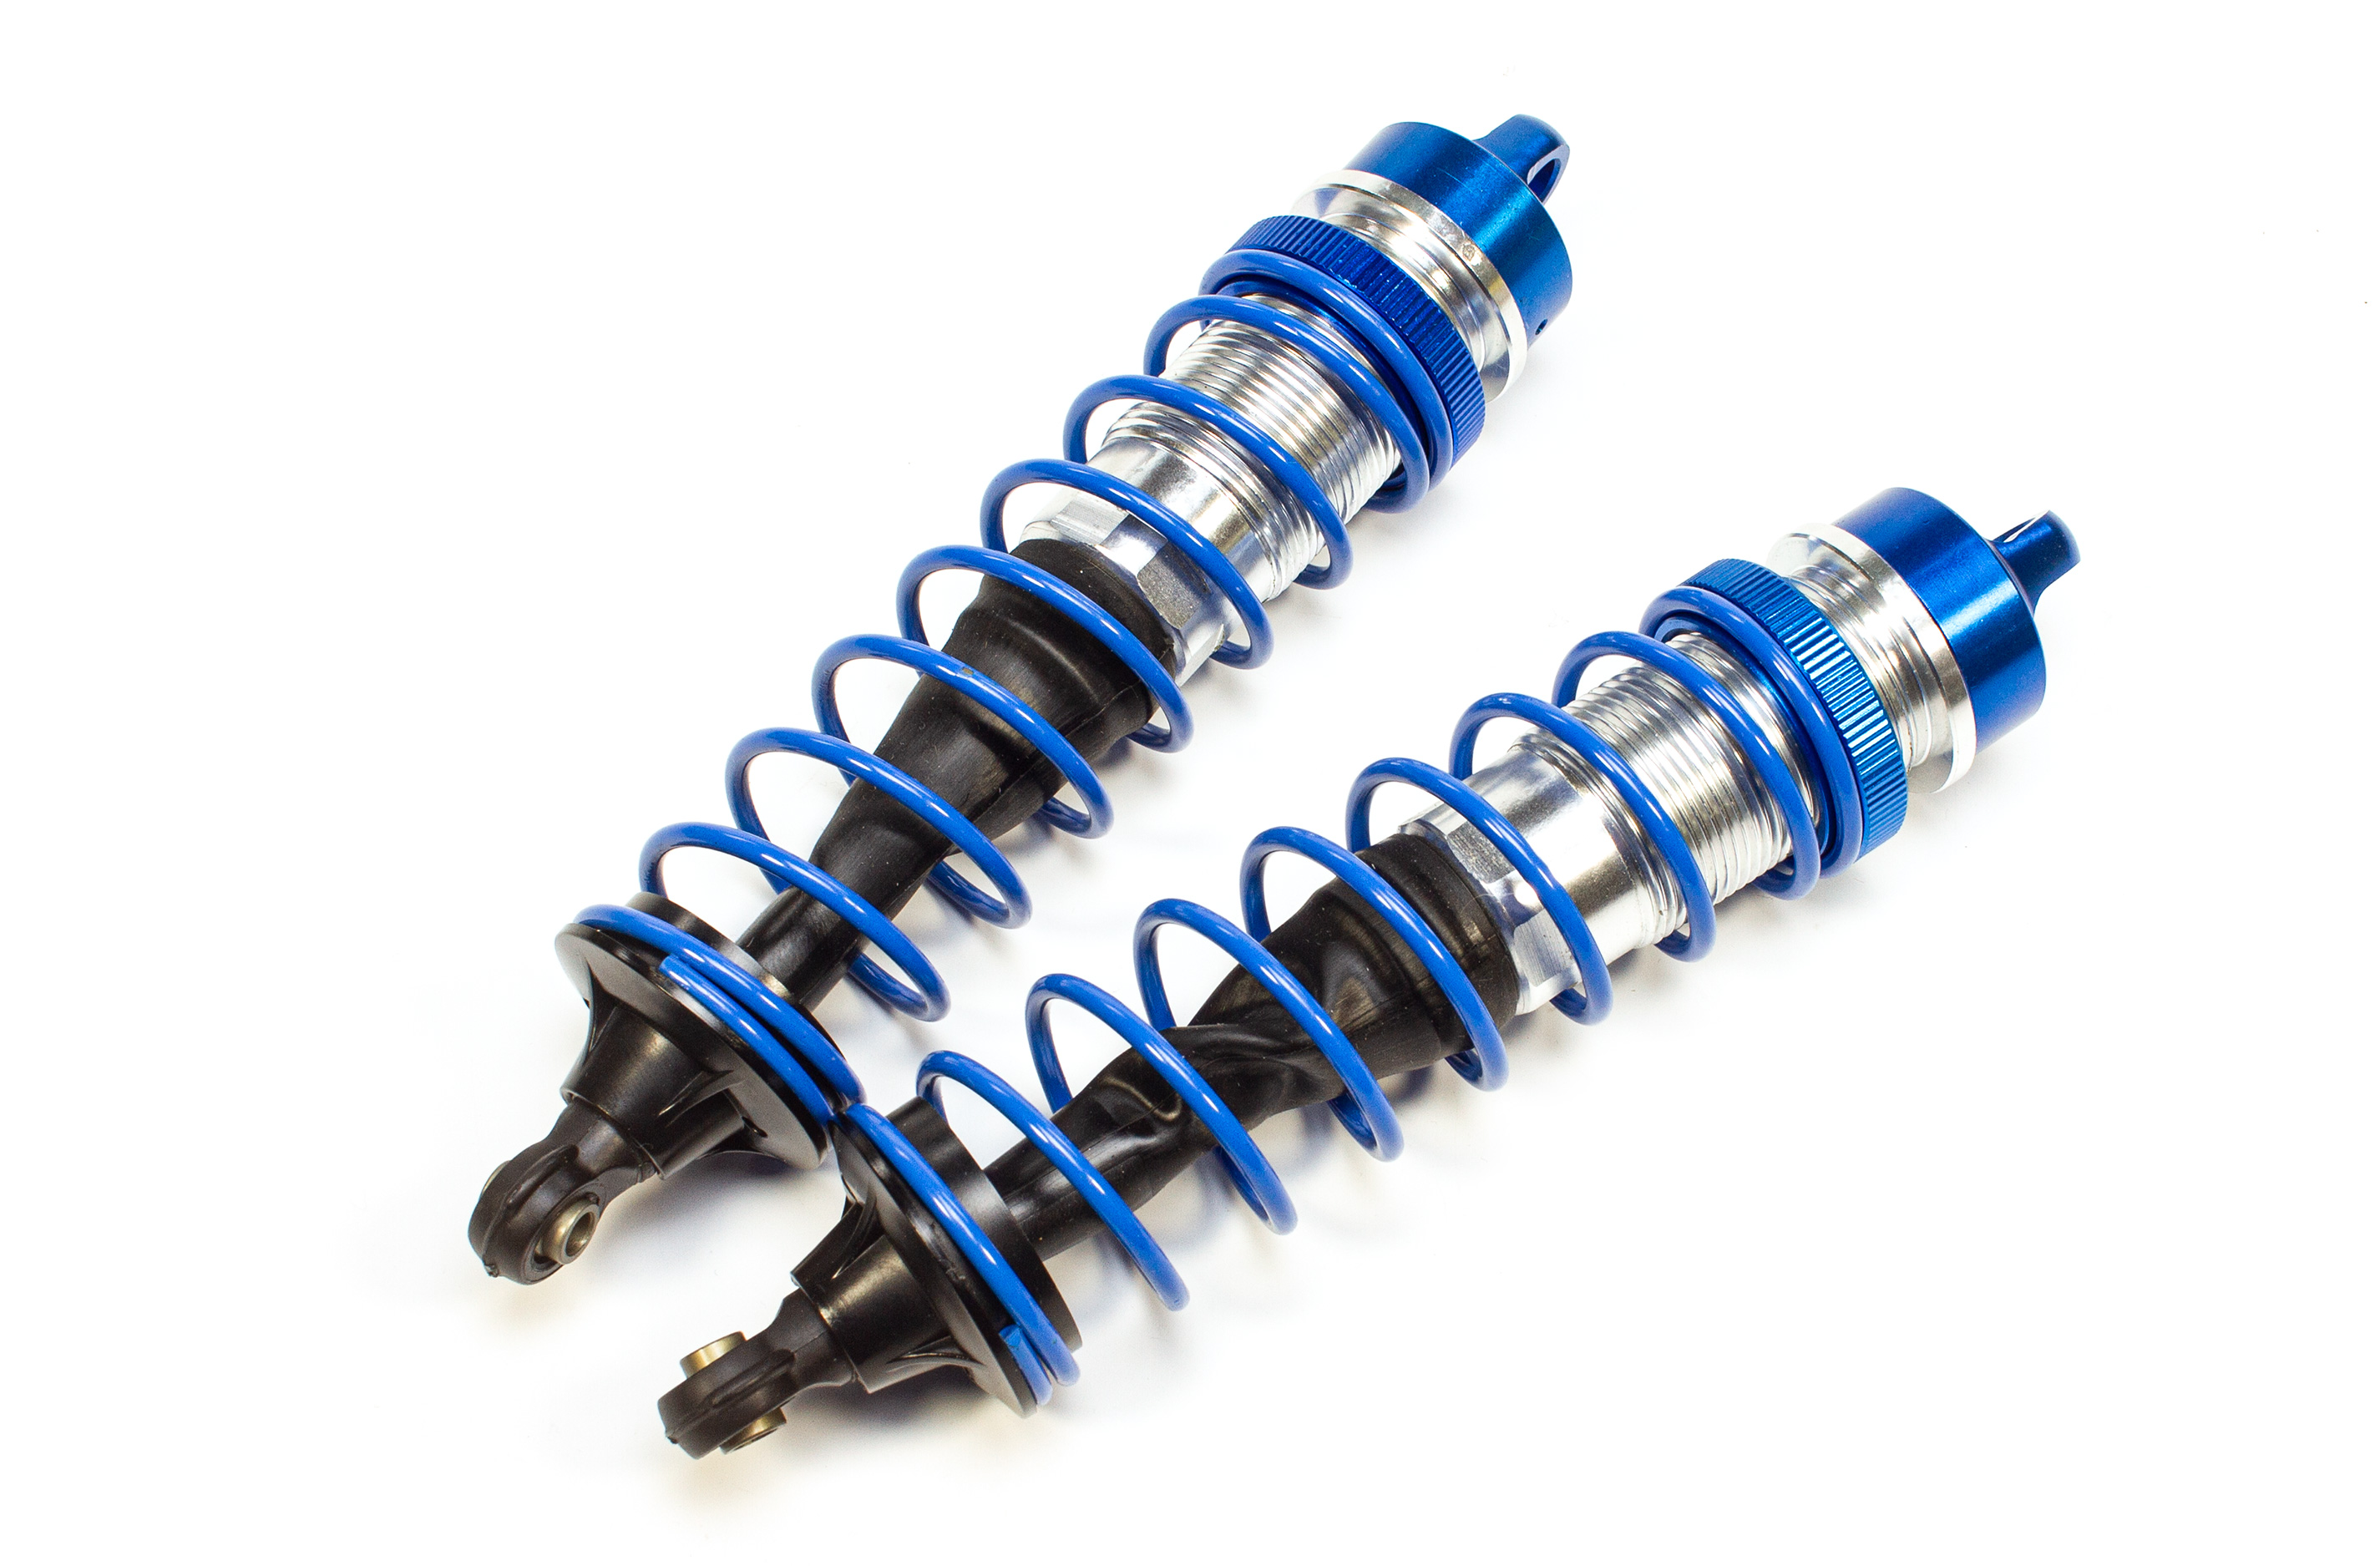 B69029 Shock absorber, complete and factory filled